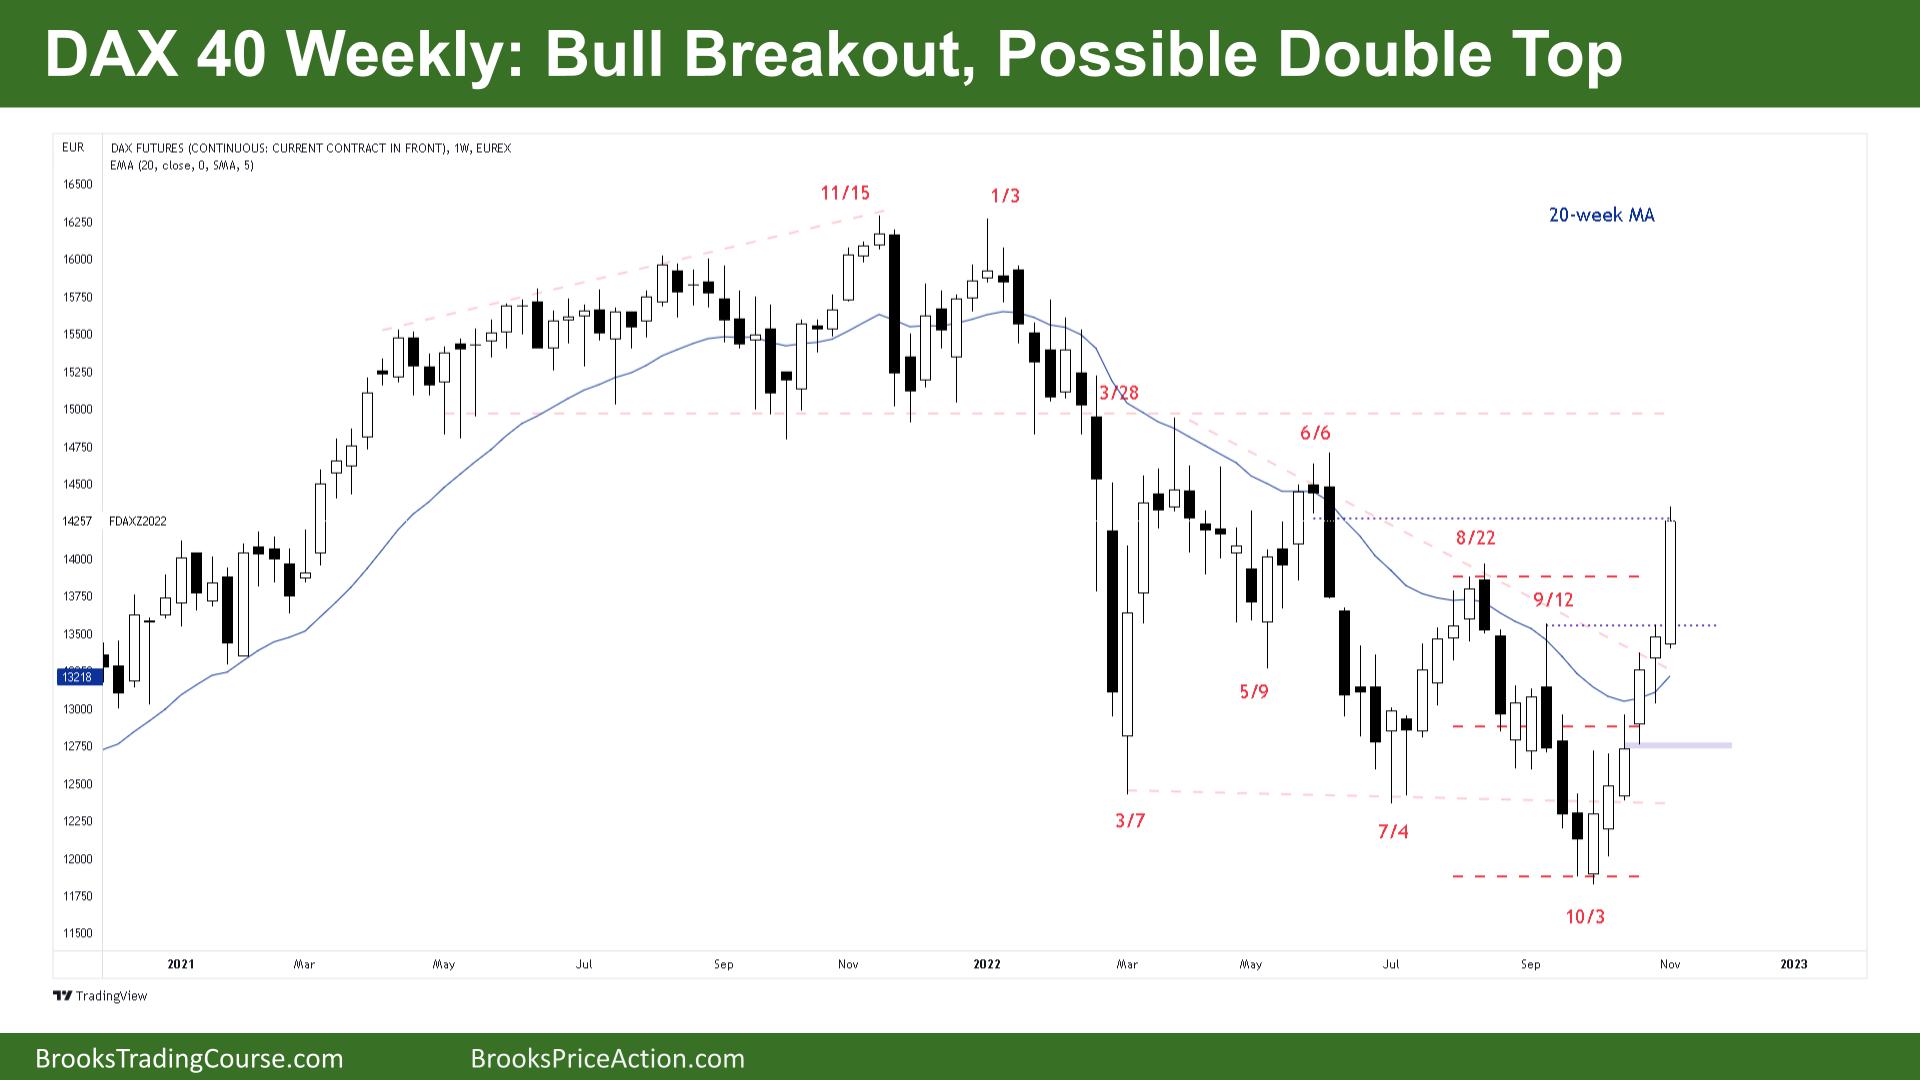 DAX 40 Bull Breakout Possible Double Top